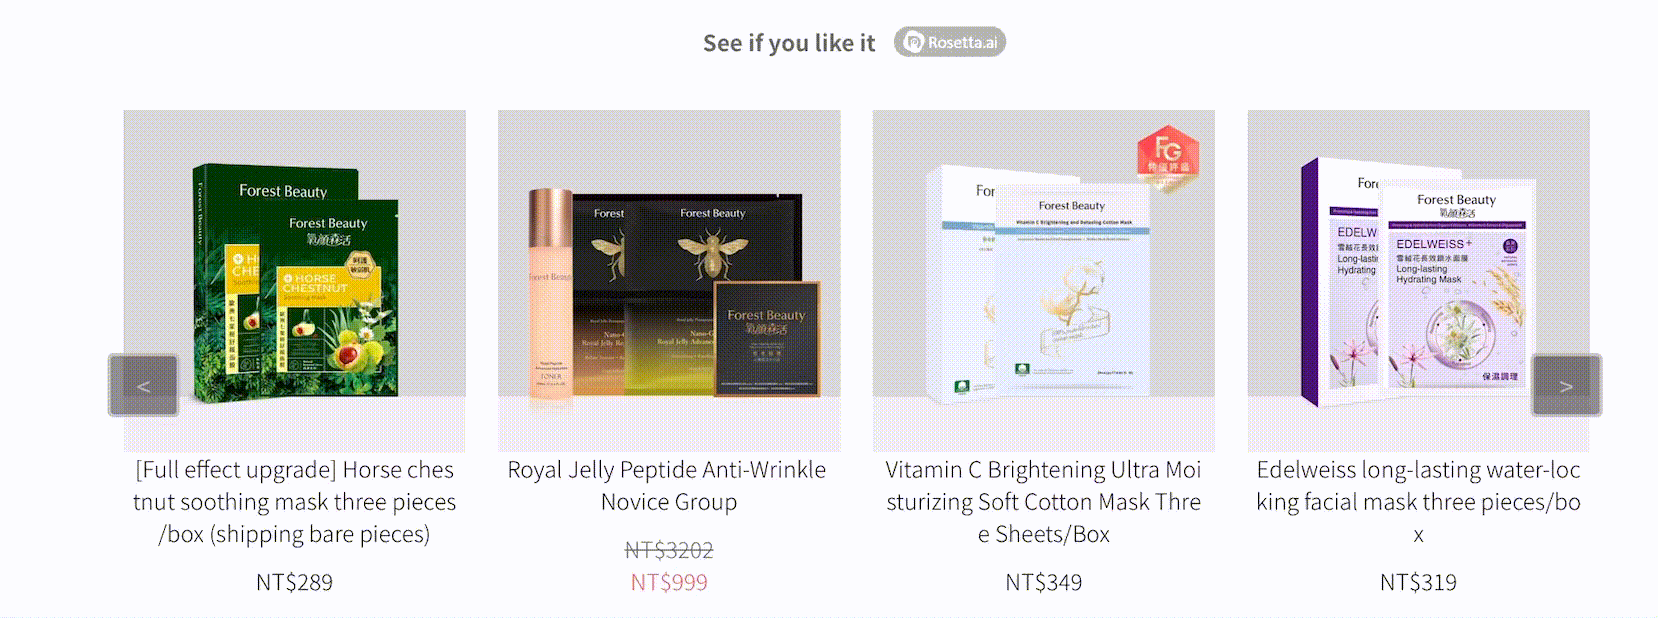 Rosetta.ai in-page carousel product recommender for cosmetics brand forest beauty